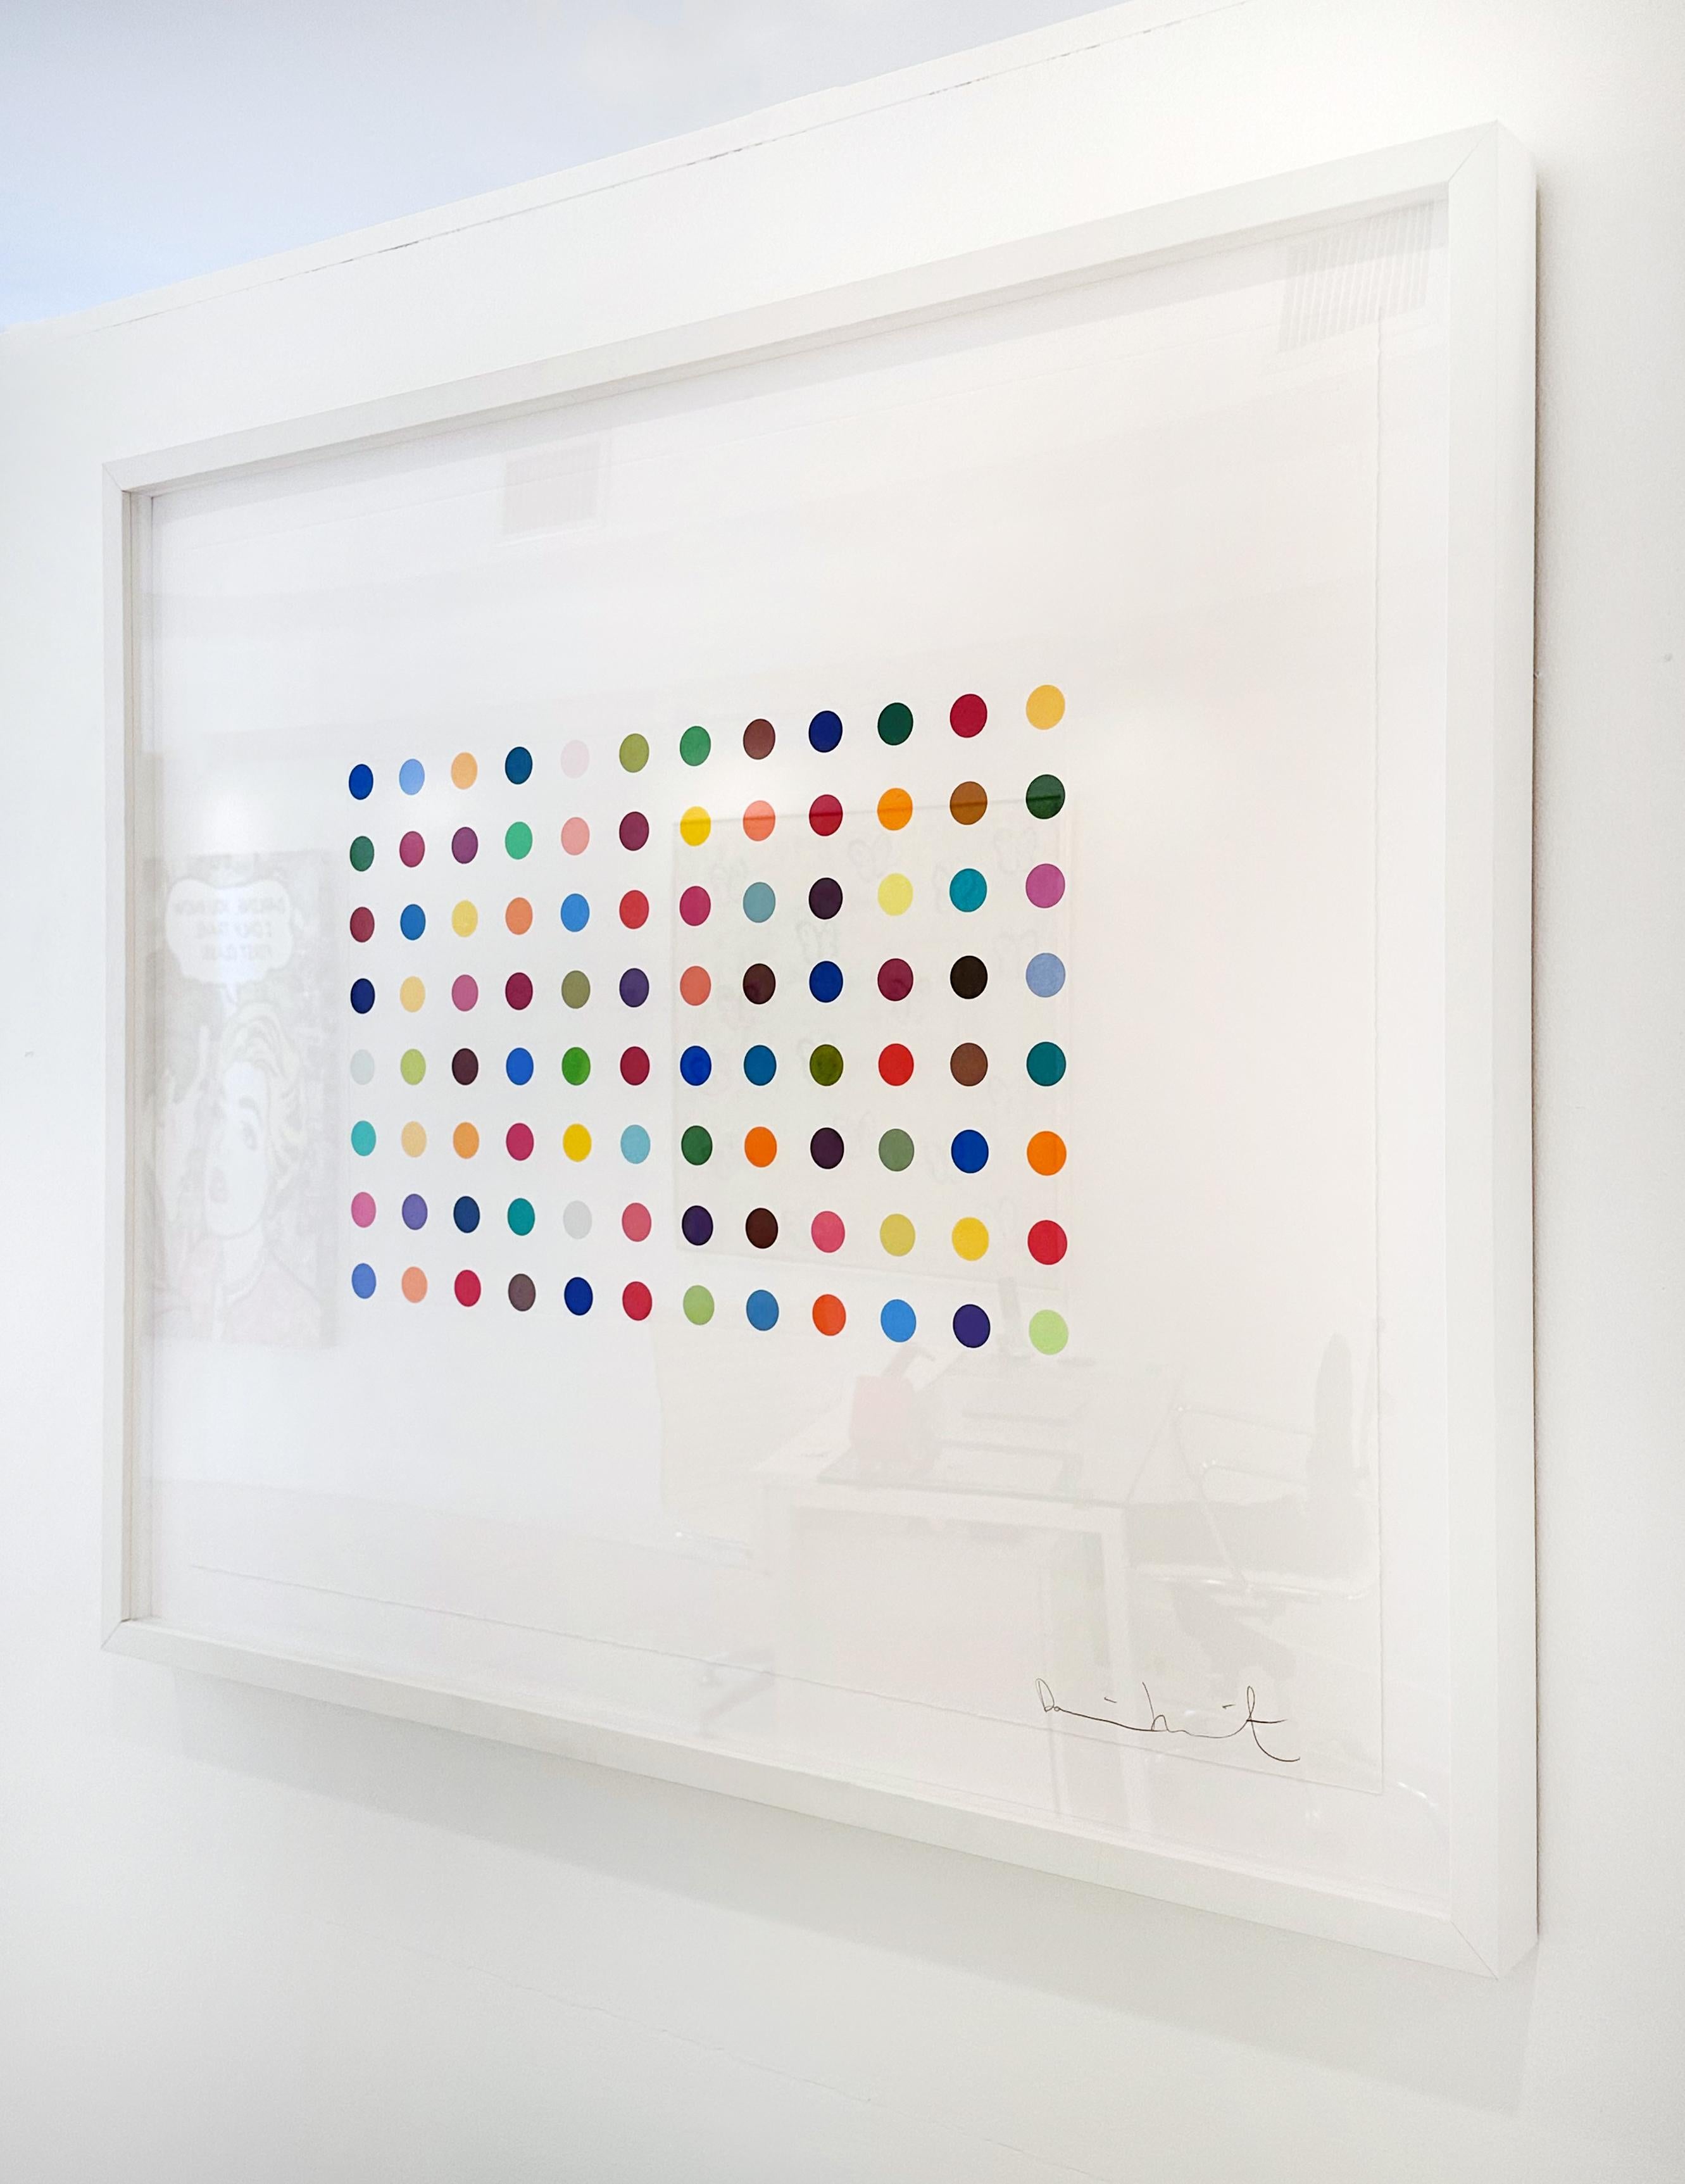 Artist:  Hirst, Damien
Title:  Bromphenol Blue
Series:  Spots
Date:  2005
Medium:  Etching and Aquatint in Colours on Hahnemühle Paper
Unframed Dimensions:  30